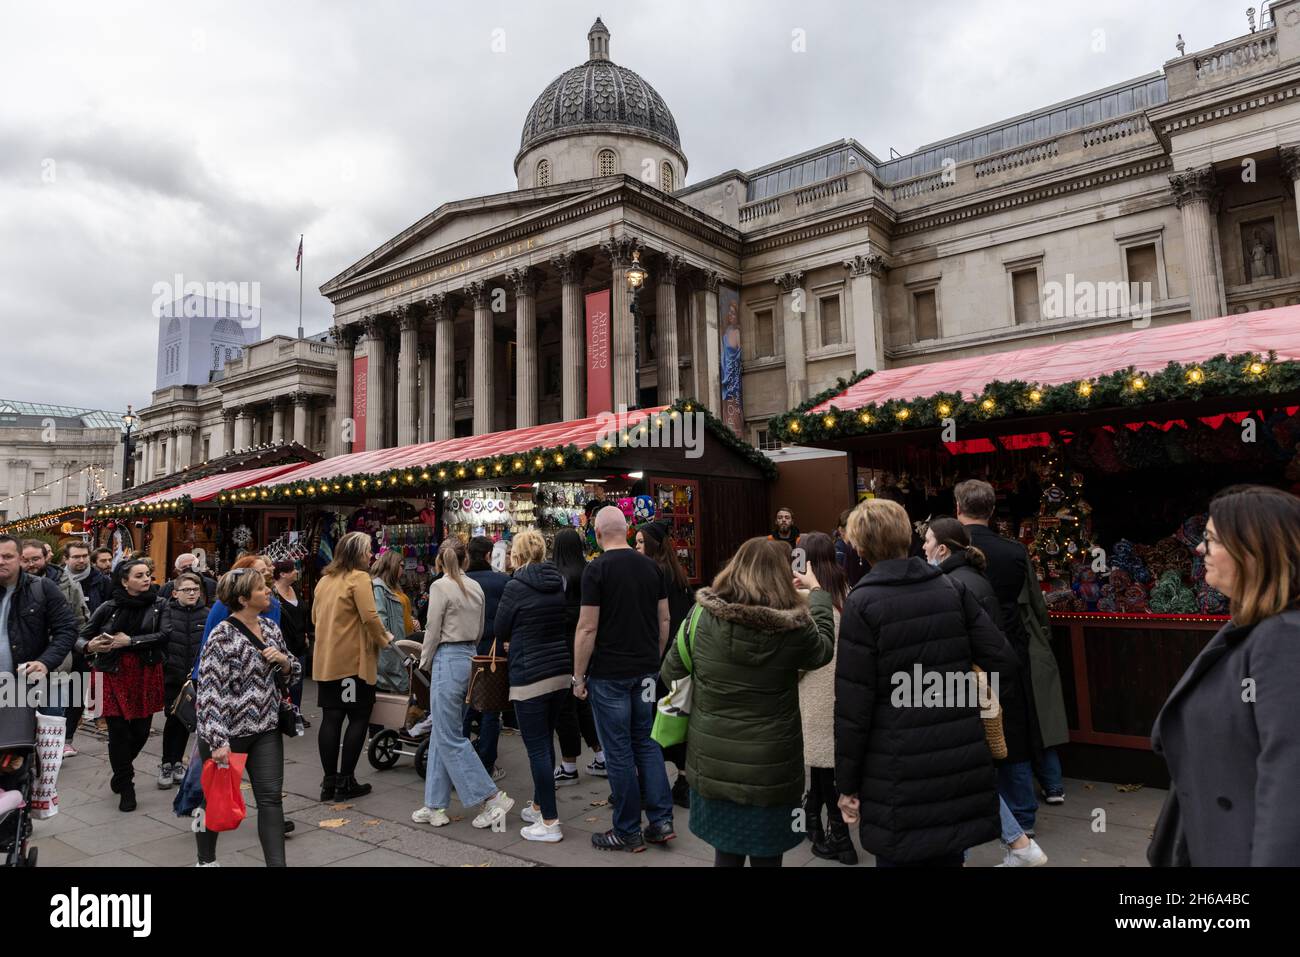 Tourists congregate in the Christmas market at Trafalgar Square, at the start of the 2021 Xmas festive season in the capital, London, England, UK Stock Photo